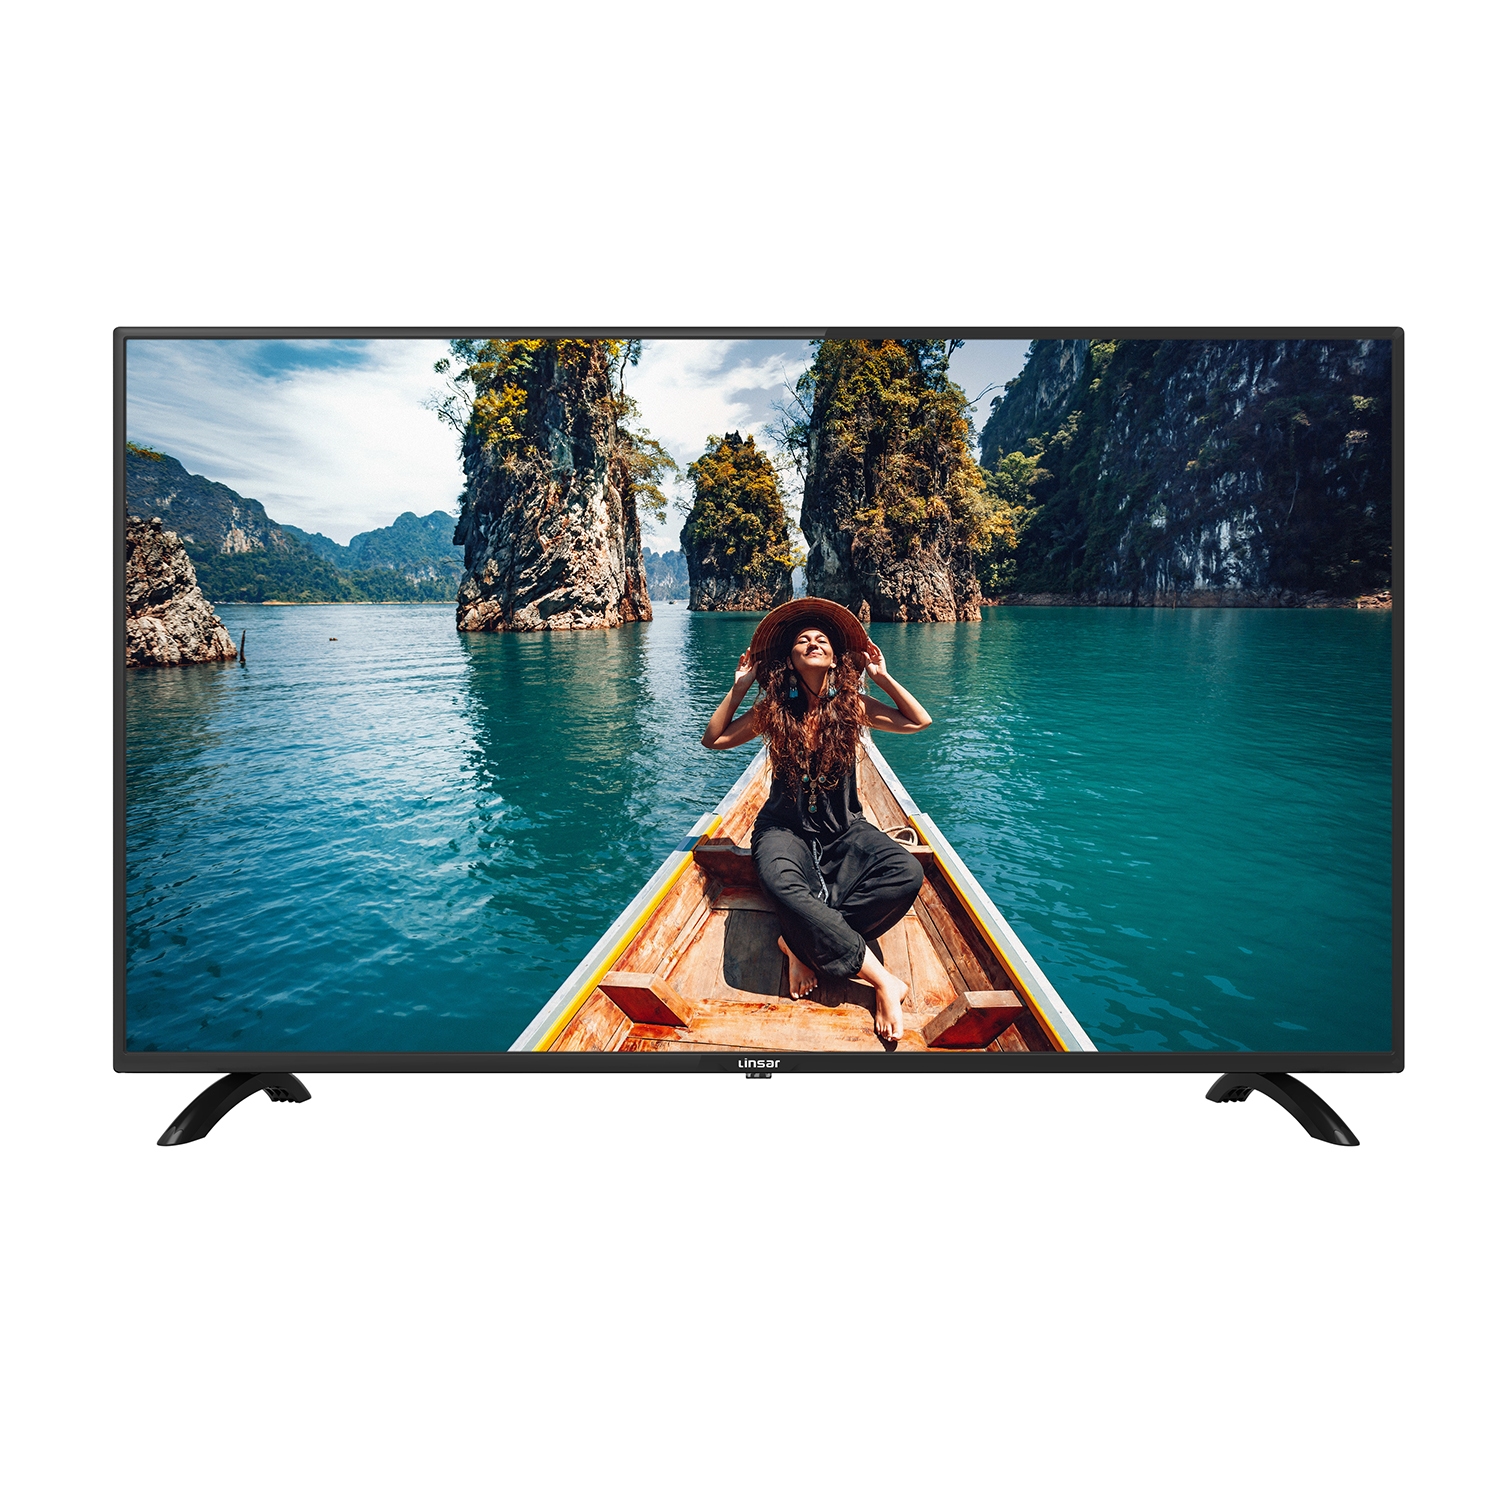 Linsar GT32LUXE 32" HD Ready TV - Freeview Play and USB Record/Playback - 0